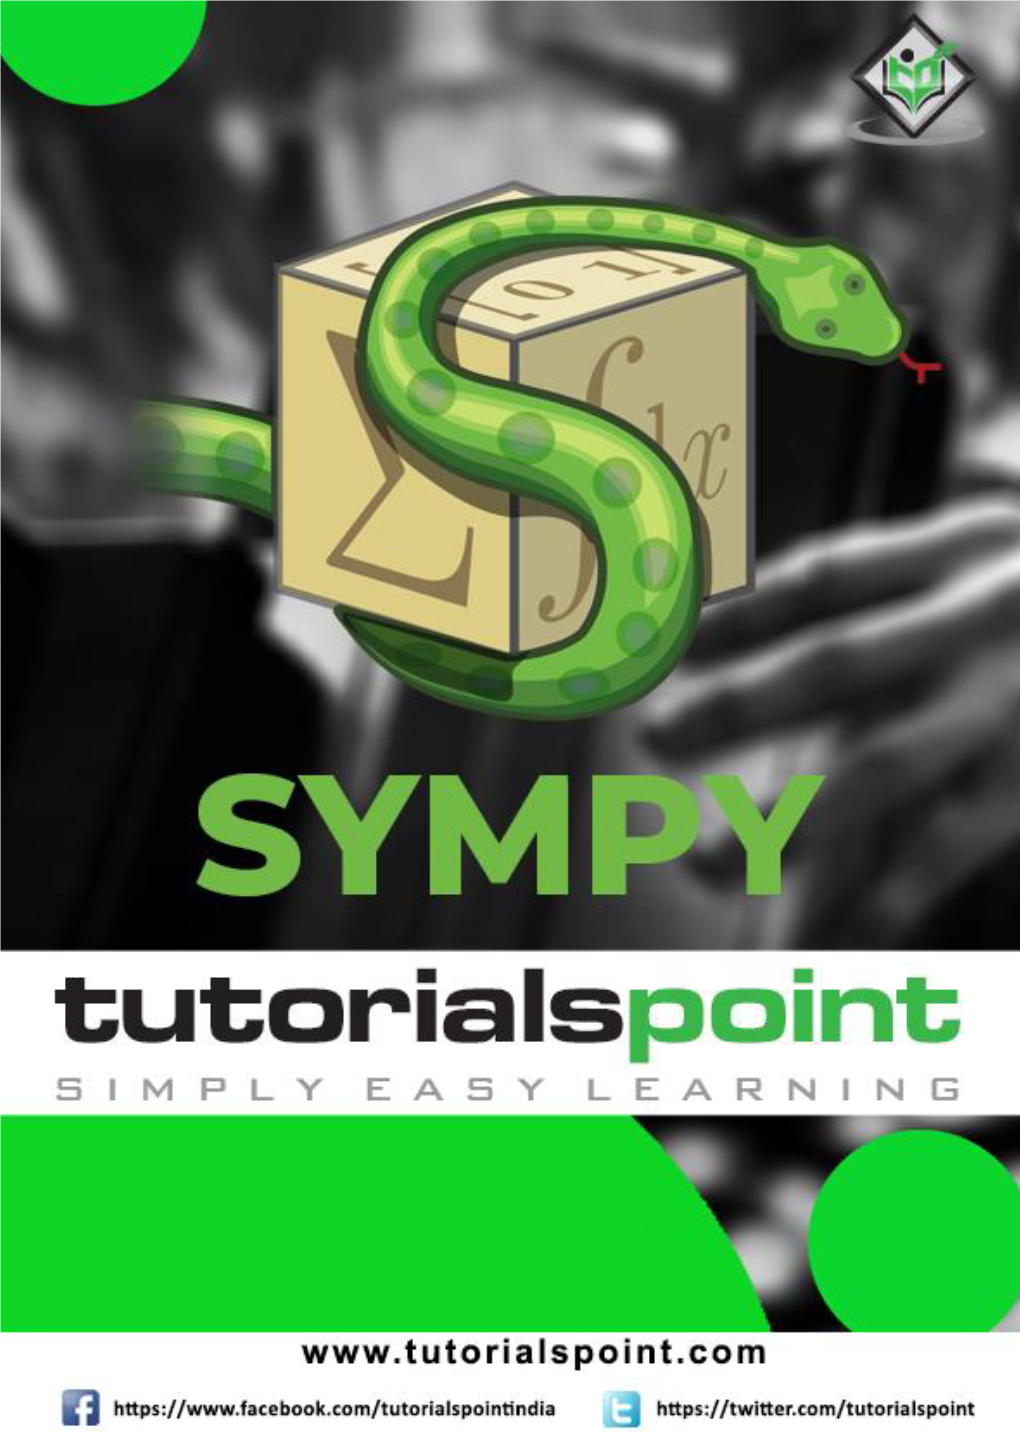 Sympy Is a Python Library for Symbolic Mathematics